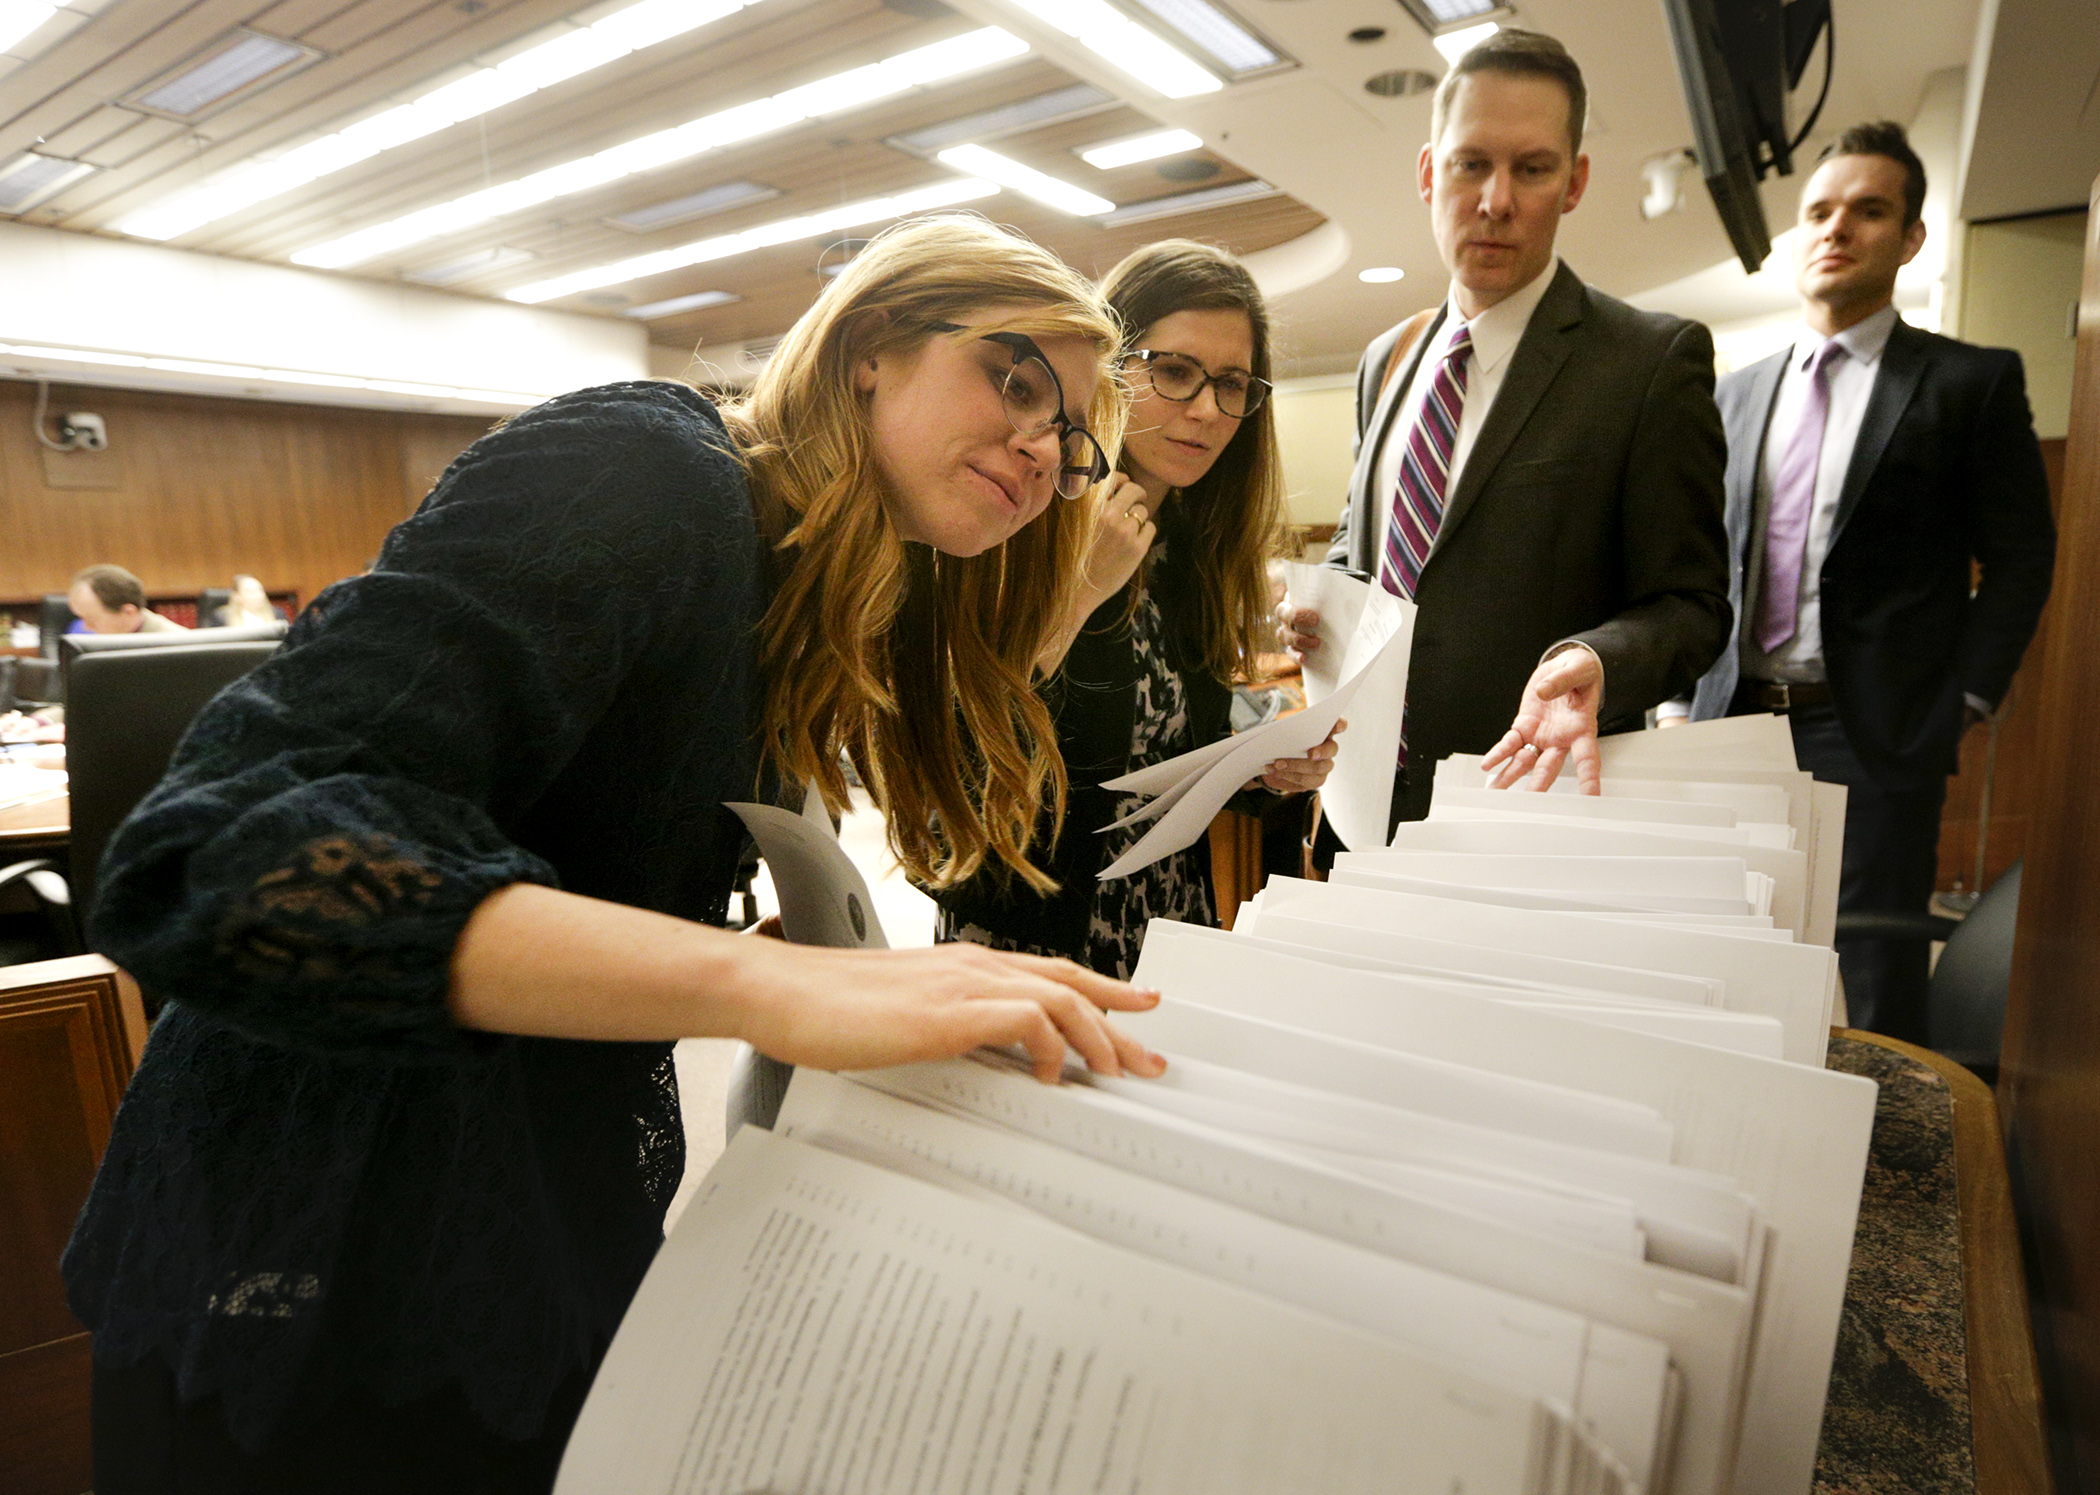 Audience members at the March 12 meeting of the House Agriculture and Food Finance and Policy Division begin the annual task of gathering large quantities of paper as the division begins to develop an omnibus bill. Photo by Paul Battaglia